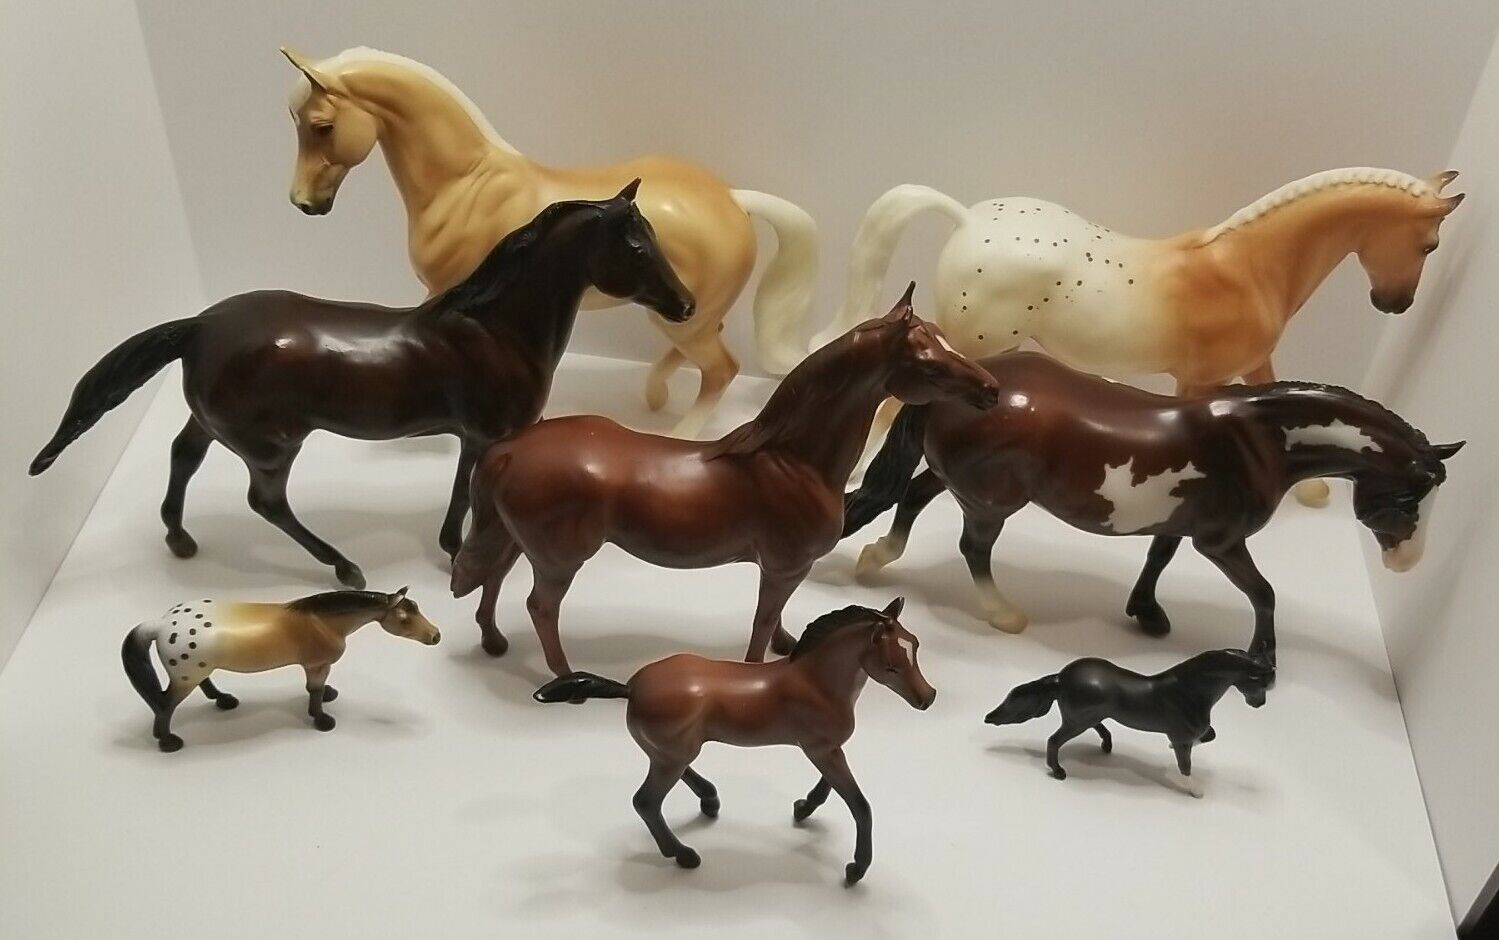 Mixed Lot Of 8 Vintage Breyer Molding  Model Horses 3 Mini 5r Some Damage Small